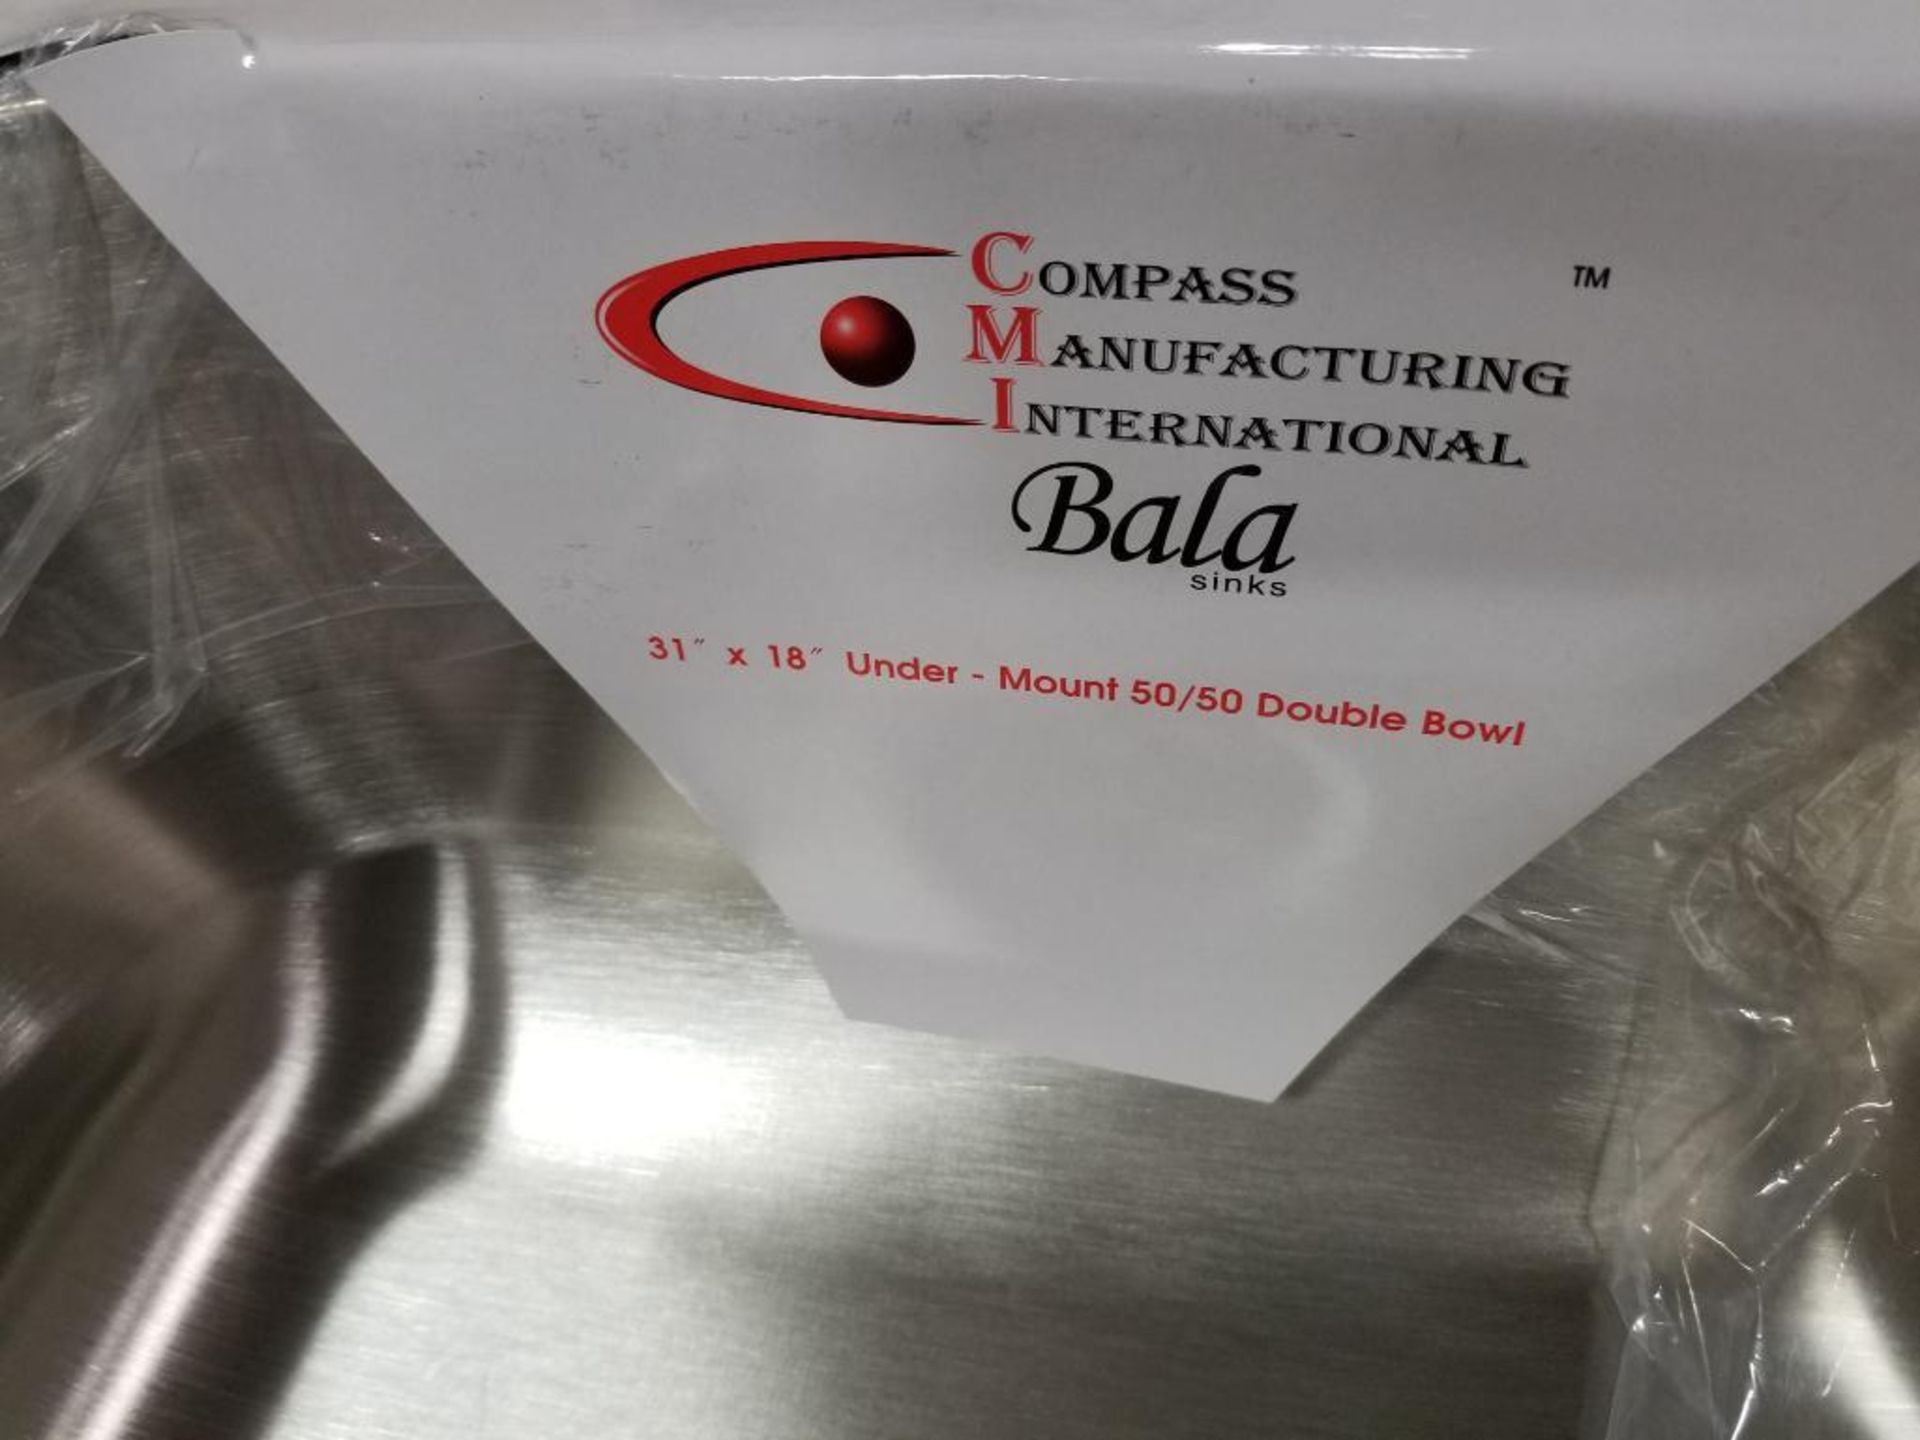 Qty 10 - Compass Manufacturing International Bala Sinks under mount 50/50 double bowl sink. - Image 4 of 7